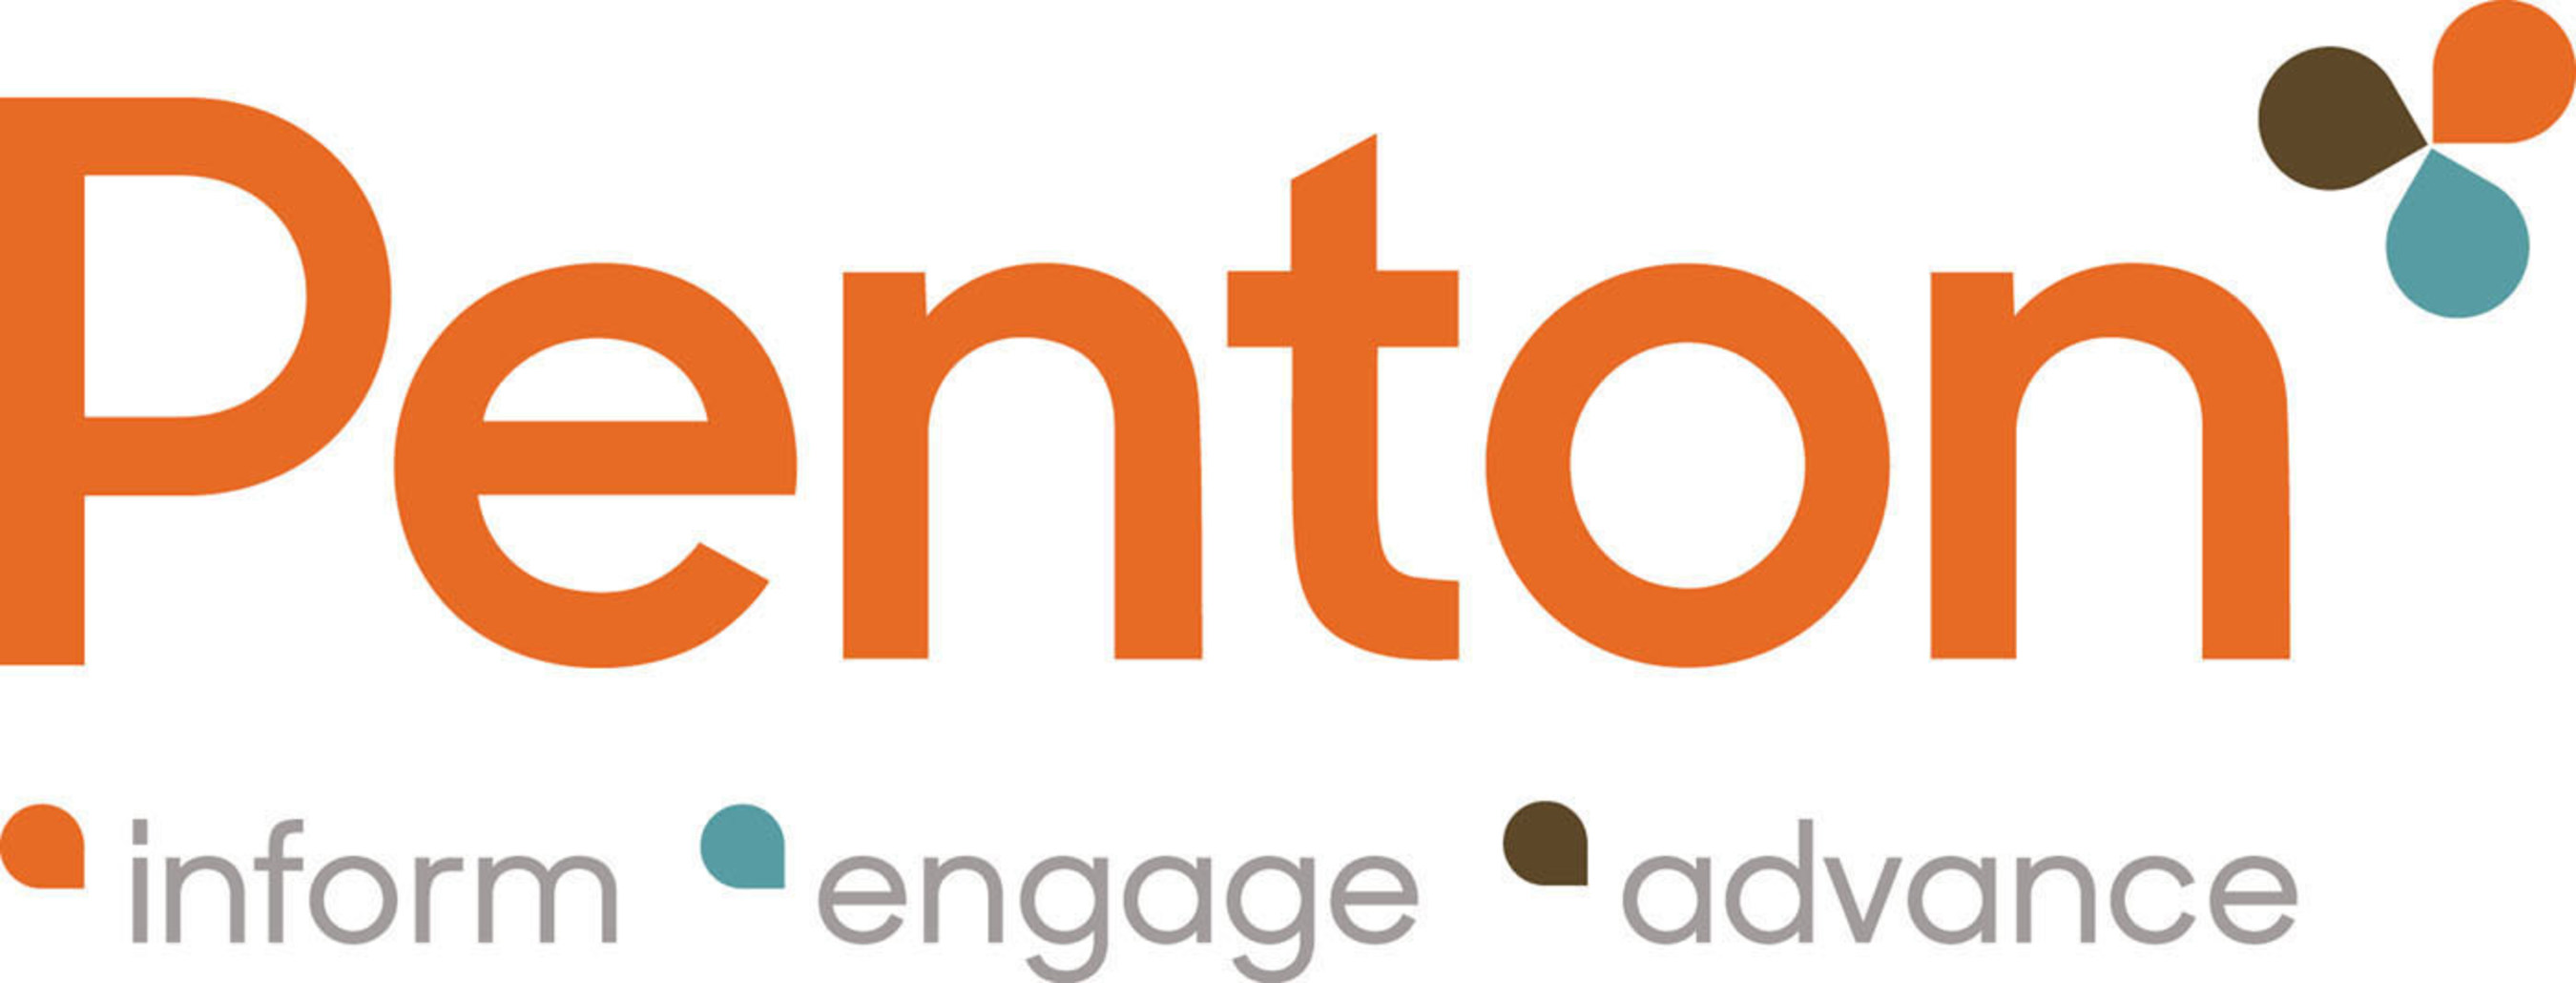 Penton informs, engages & advances the business performance of professionals.